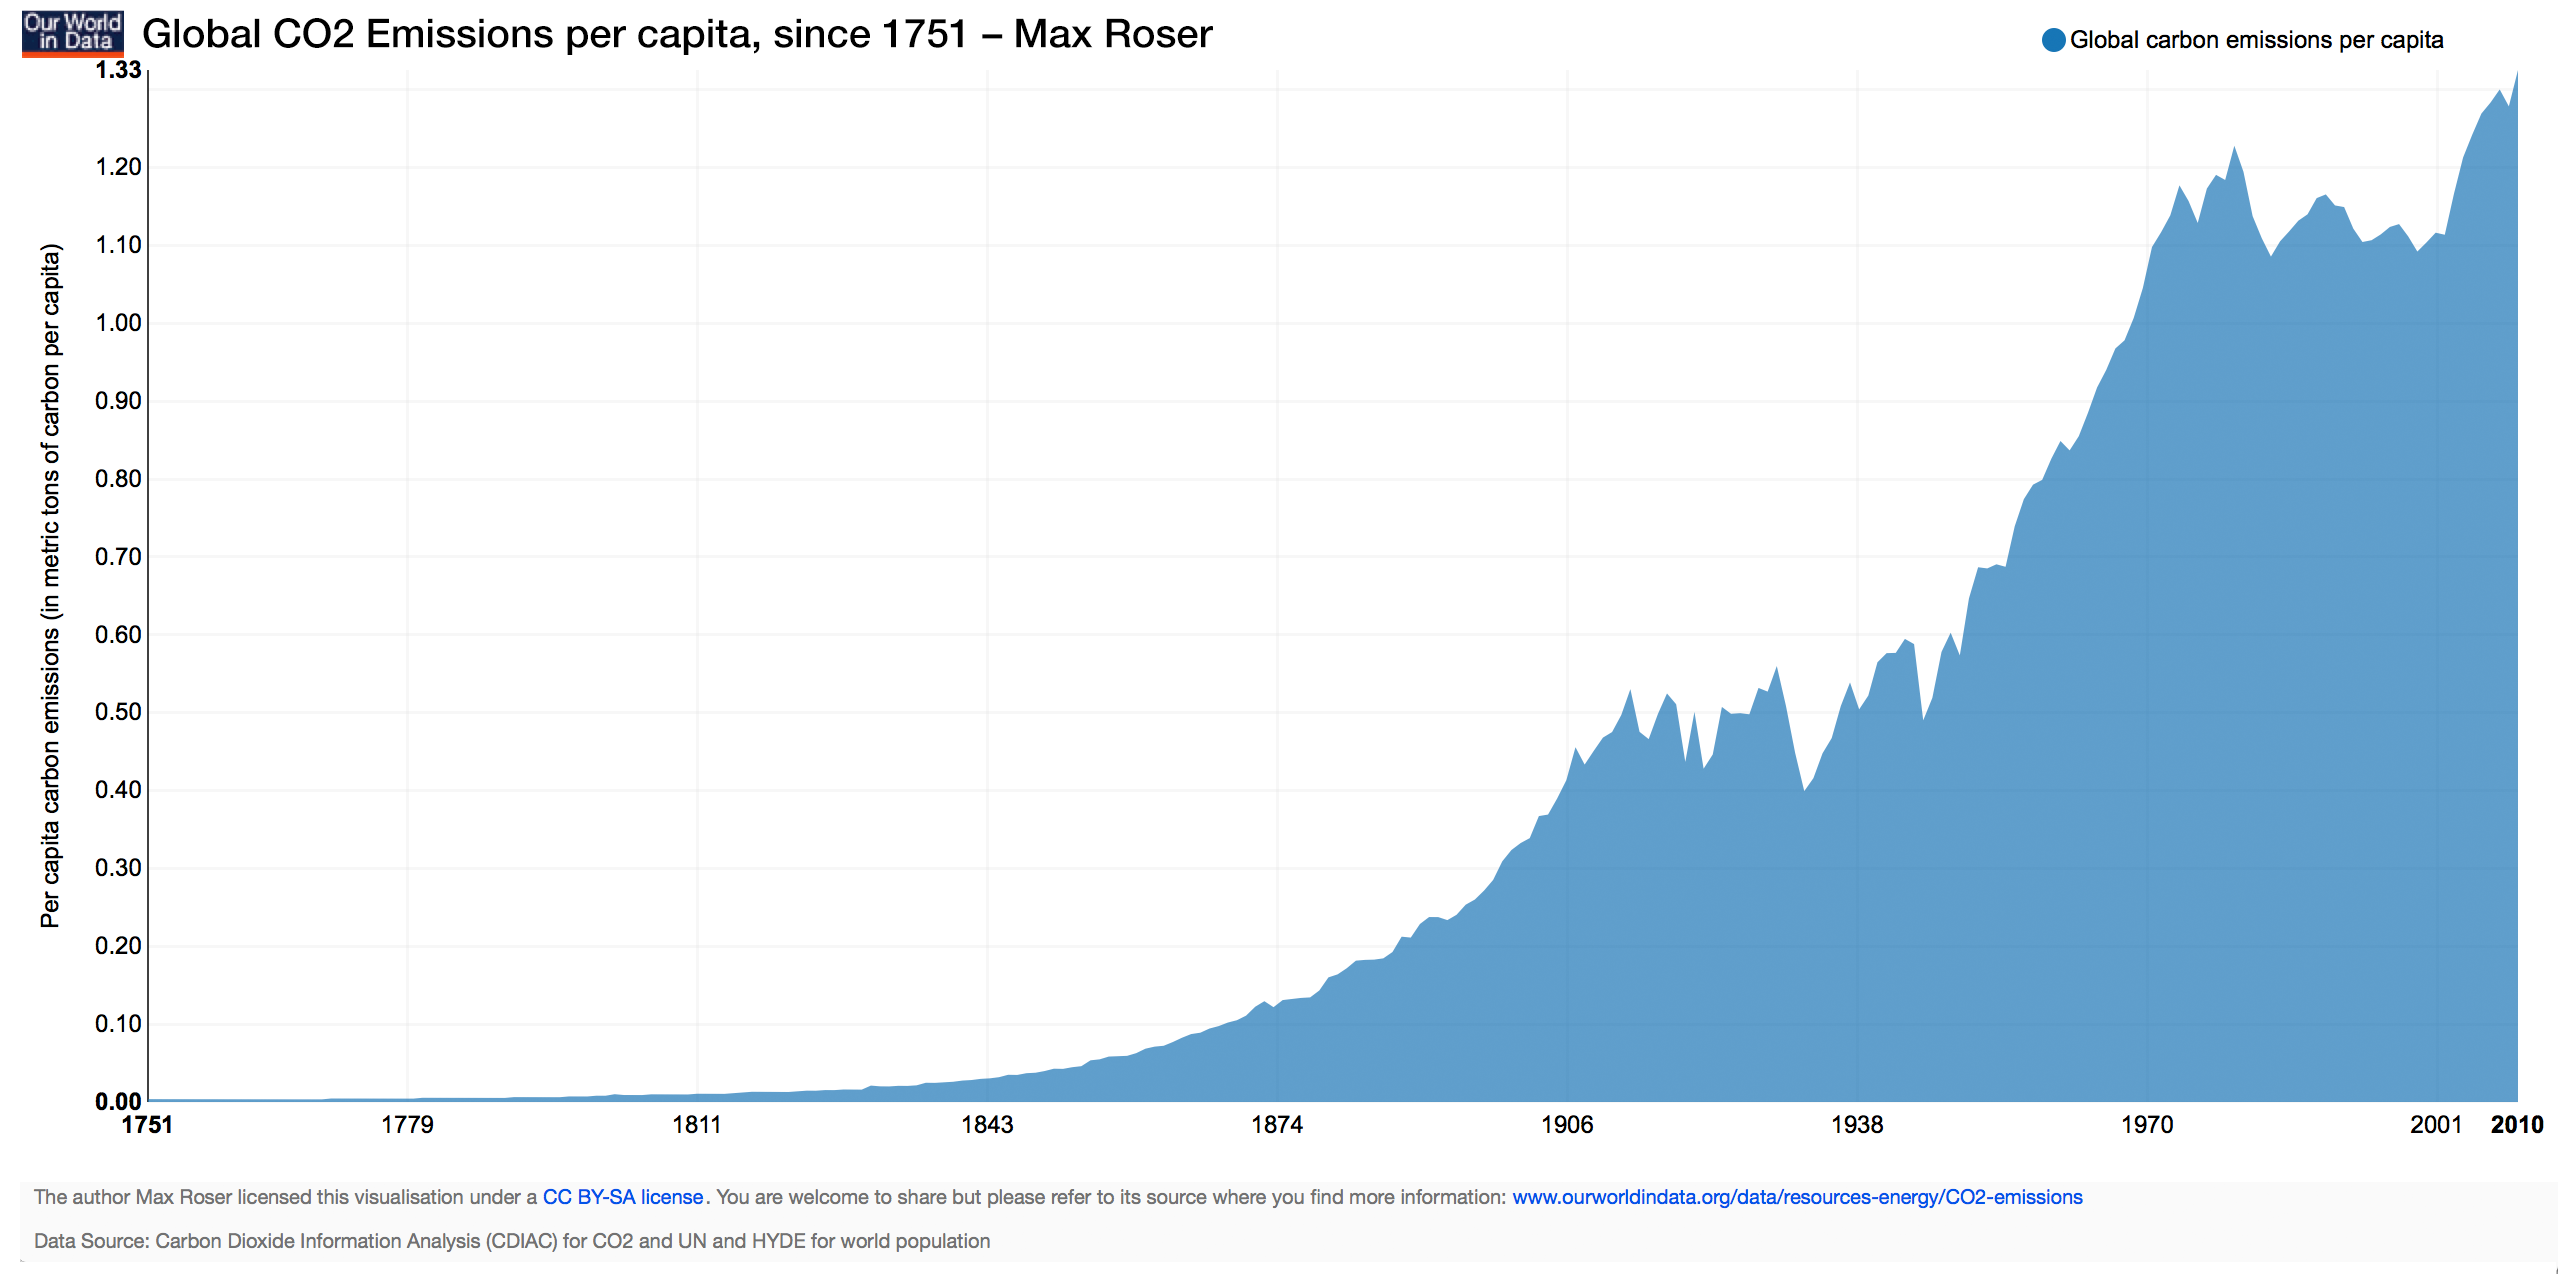 ourworldindata_global-co2-emissions-per-capita-since-1751_max-roser.png